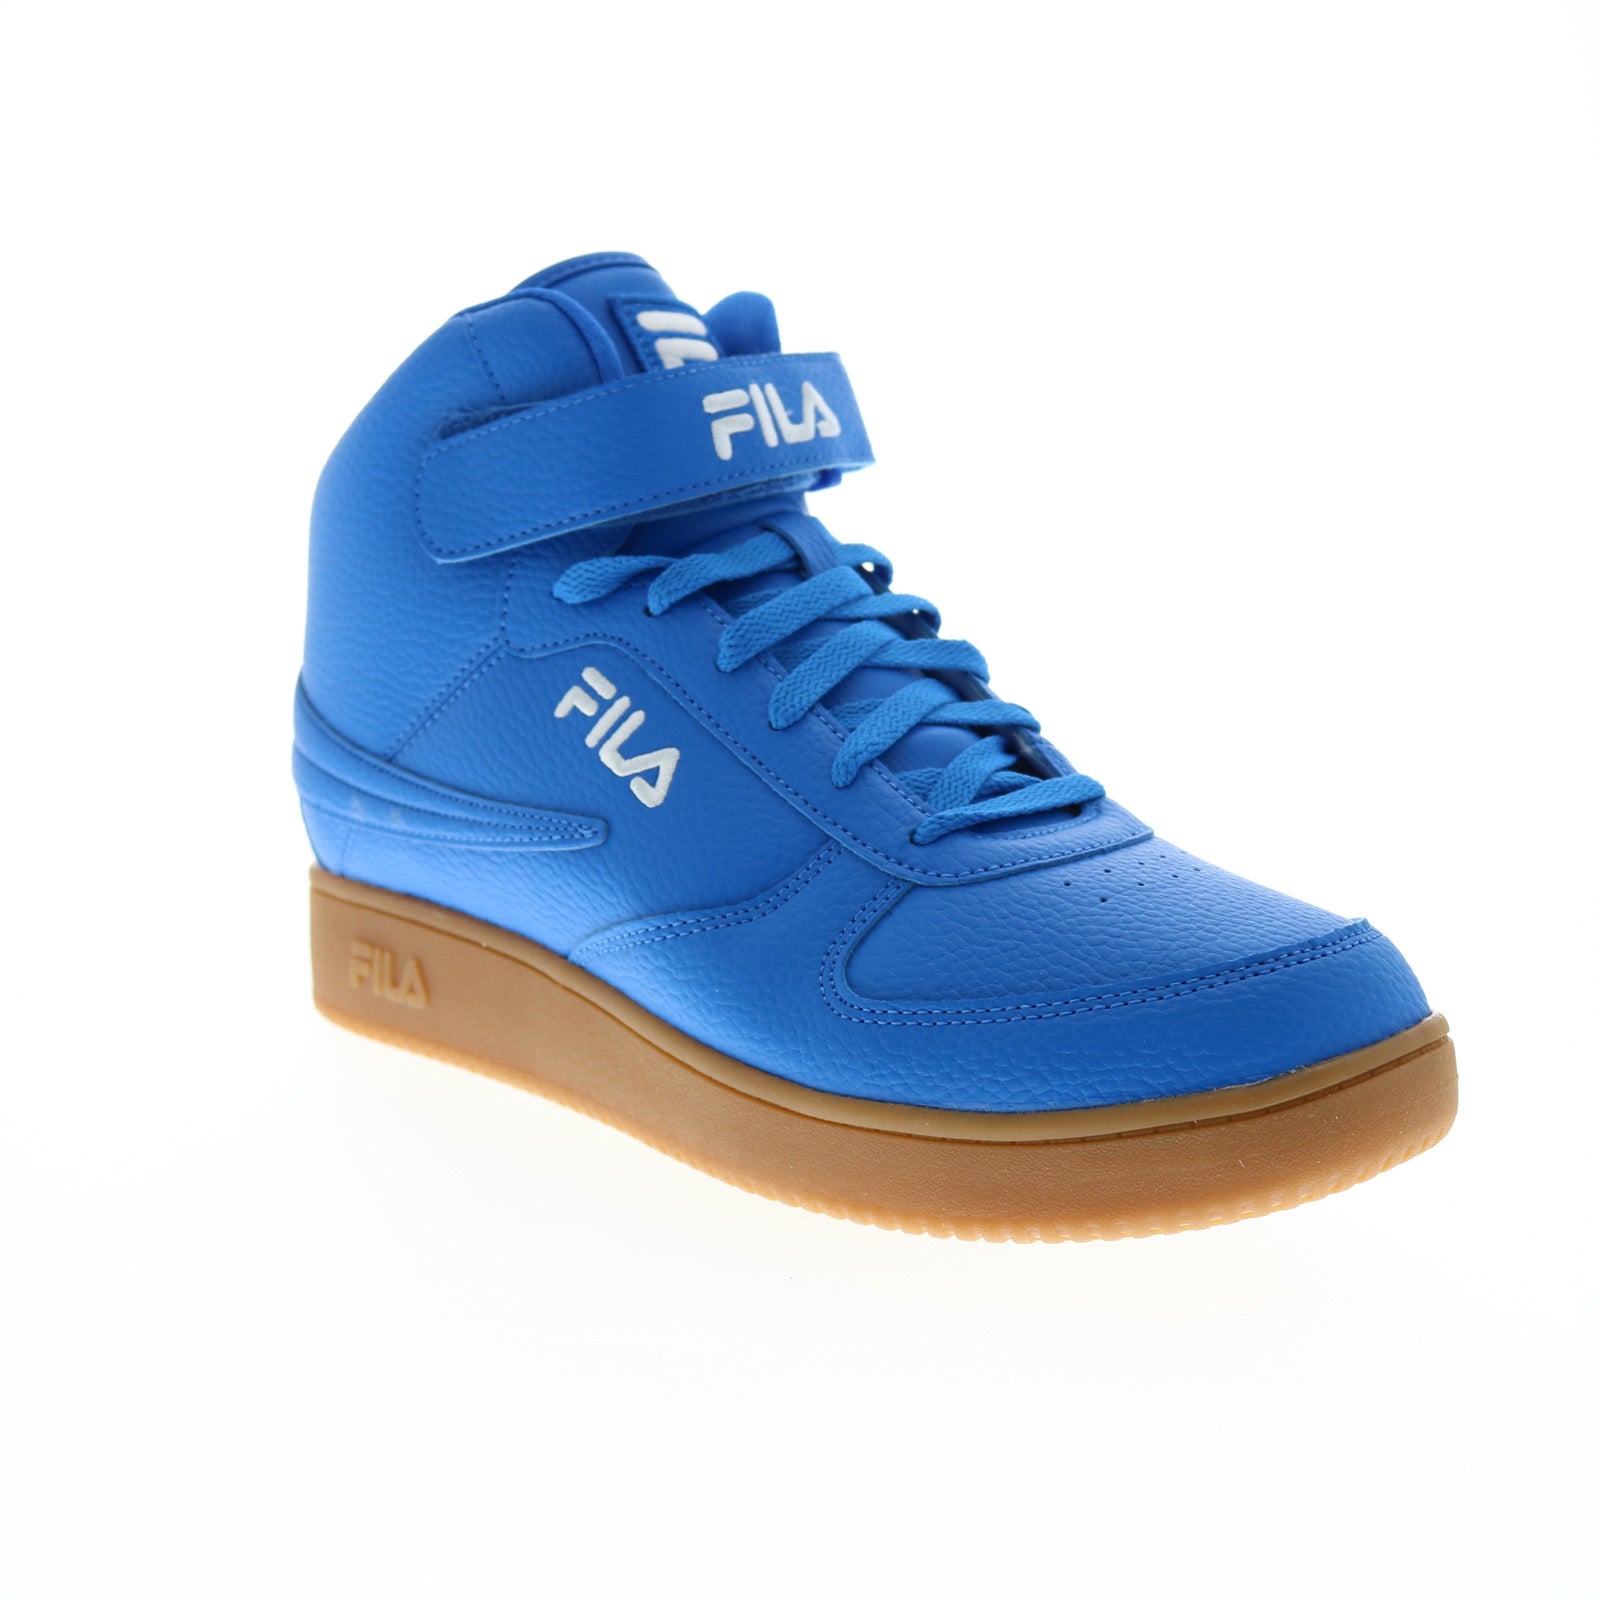 Fila A-High Gum Blue Leather Lifestyle Sneakers Shoe - Ruze Shoes